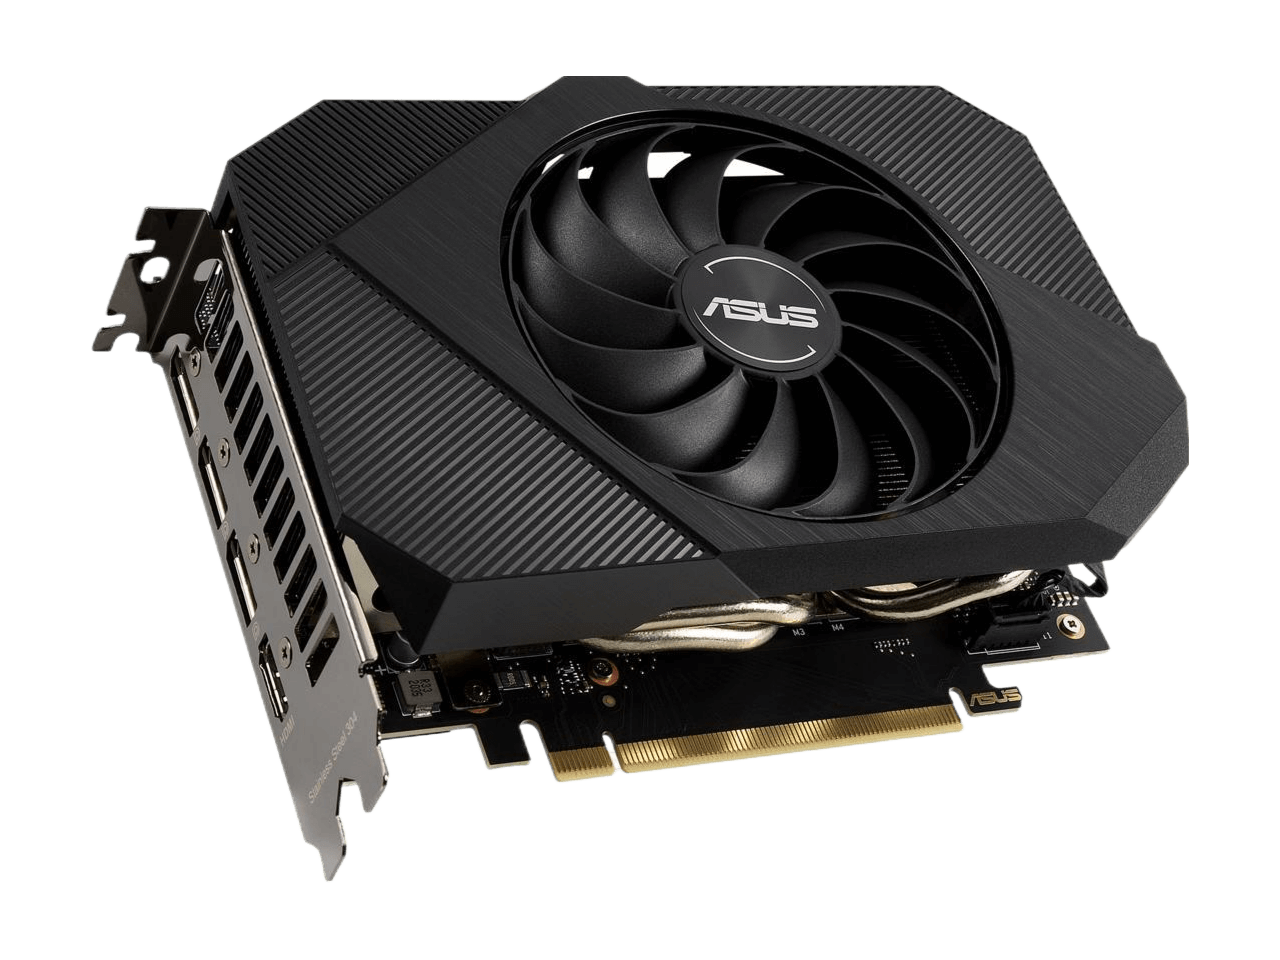 ASUS Phoenix NVIDIA GeForce RTX 3060 V2 Gaming (PCIe 4.0 12GB GDDR6 HDMI 2.1 DisplayPort 1.4a Axial-tech Fan Design Protective Backplate Dual Ball Fan Bearings Auto-Extreme) Video Graphics Card PH-RTX3060-12G-V2